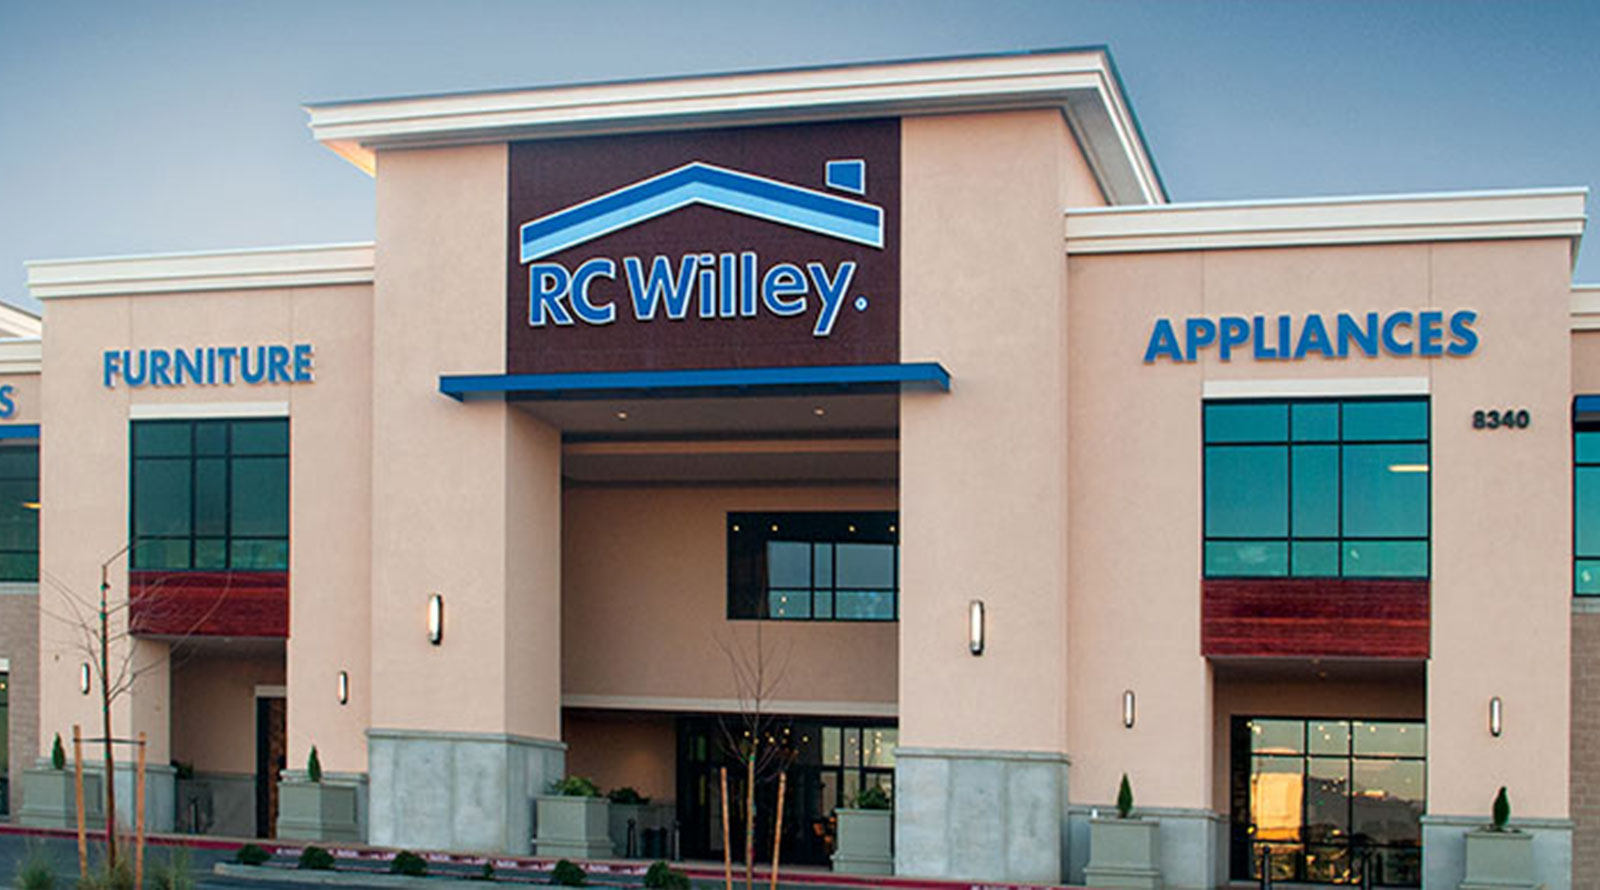 Furniture/Appliance Chain RC Willey Managing Pushback, Serving